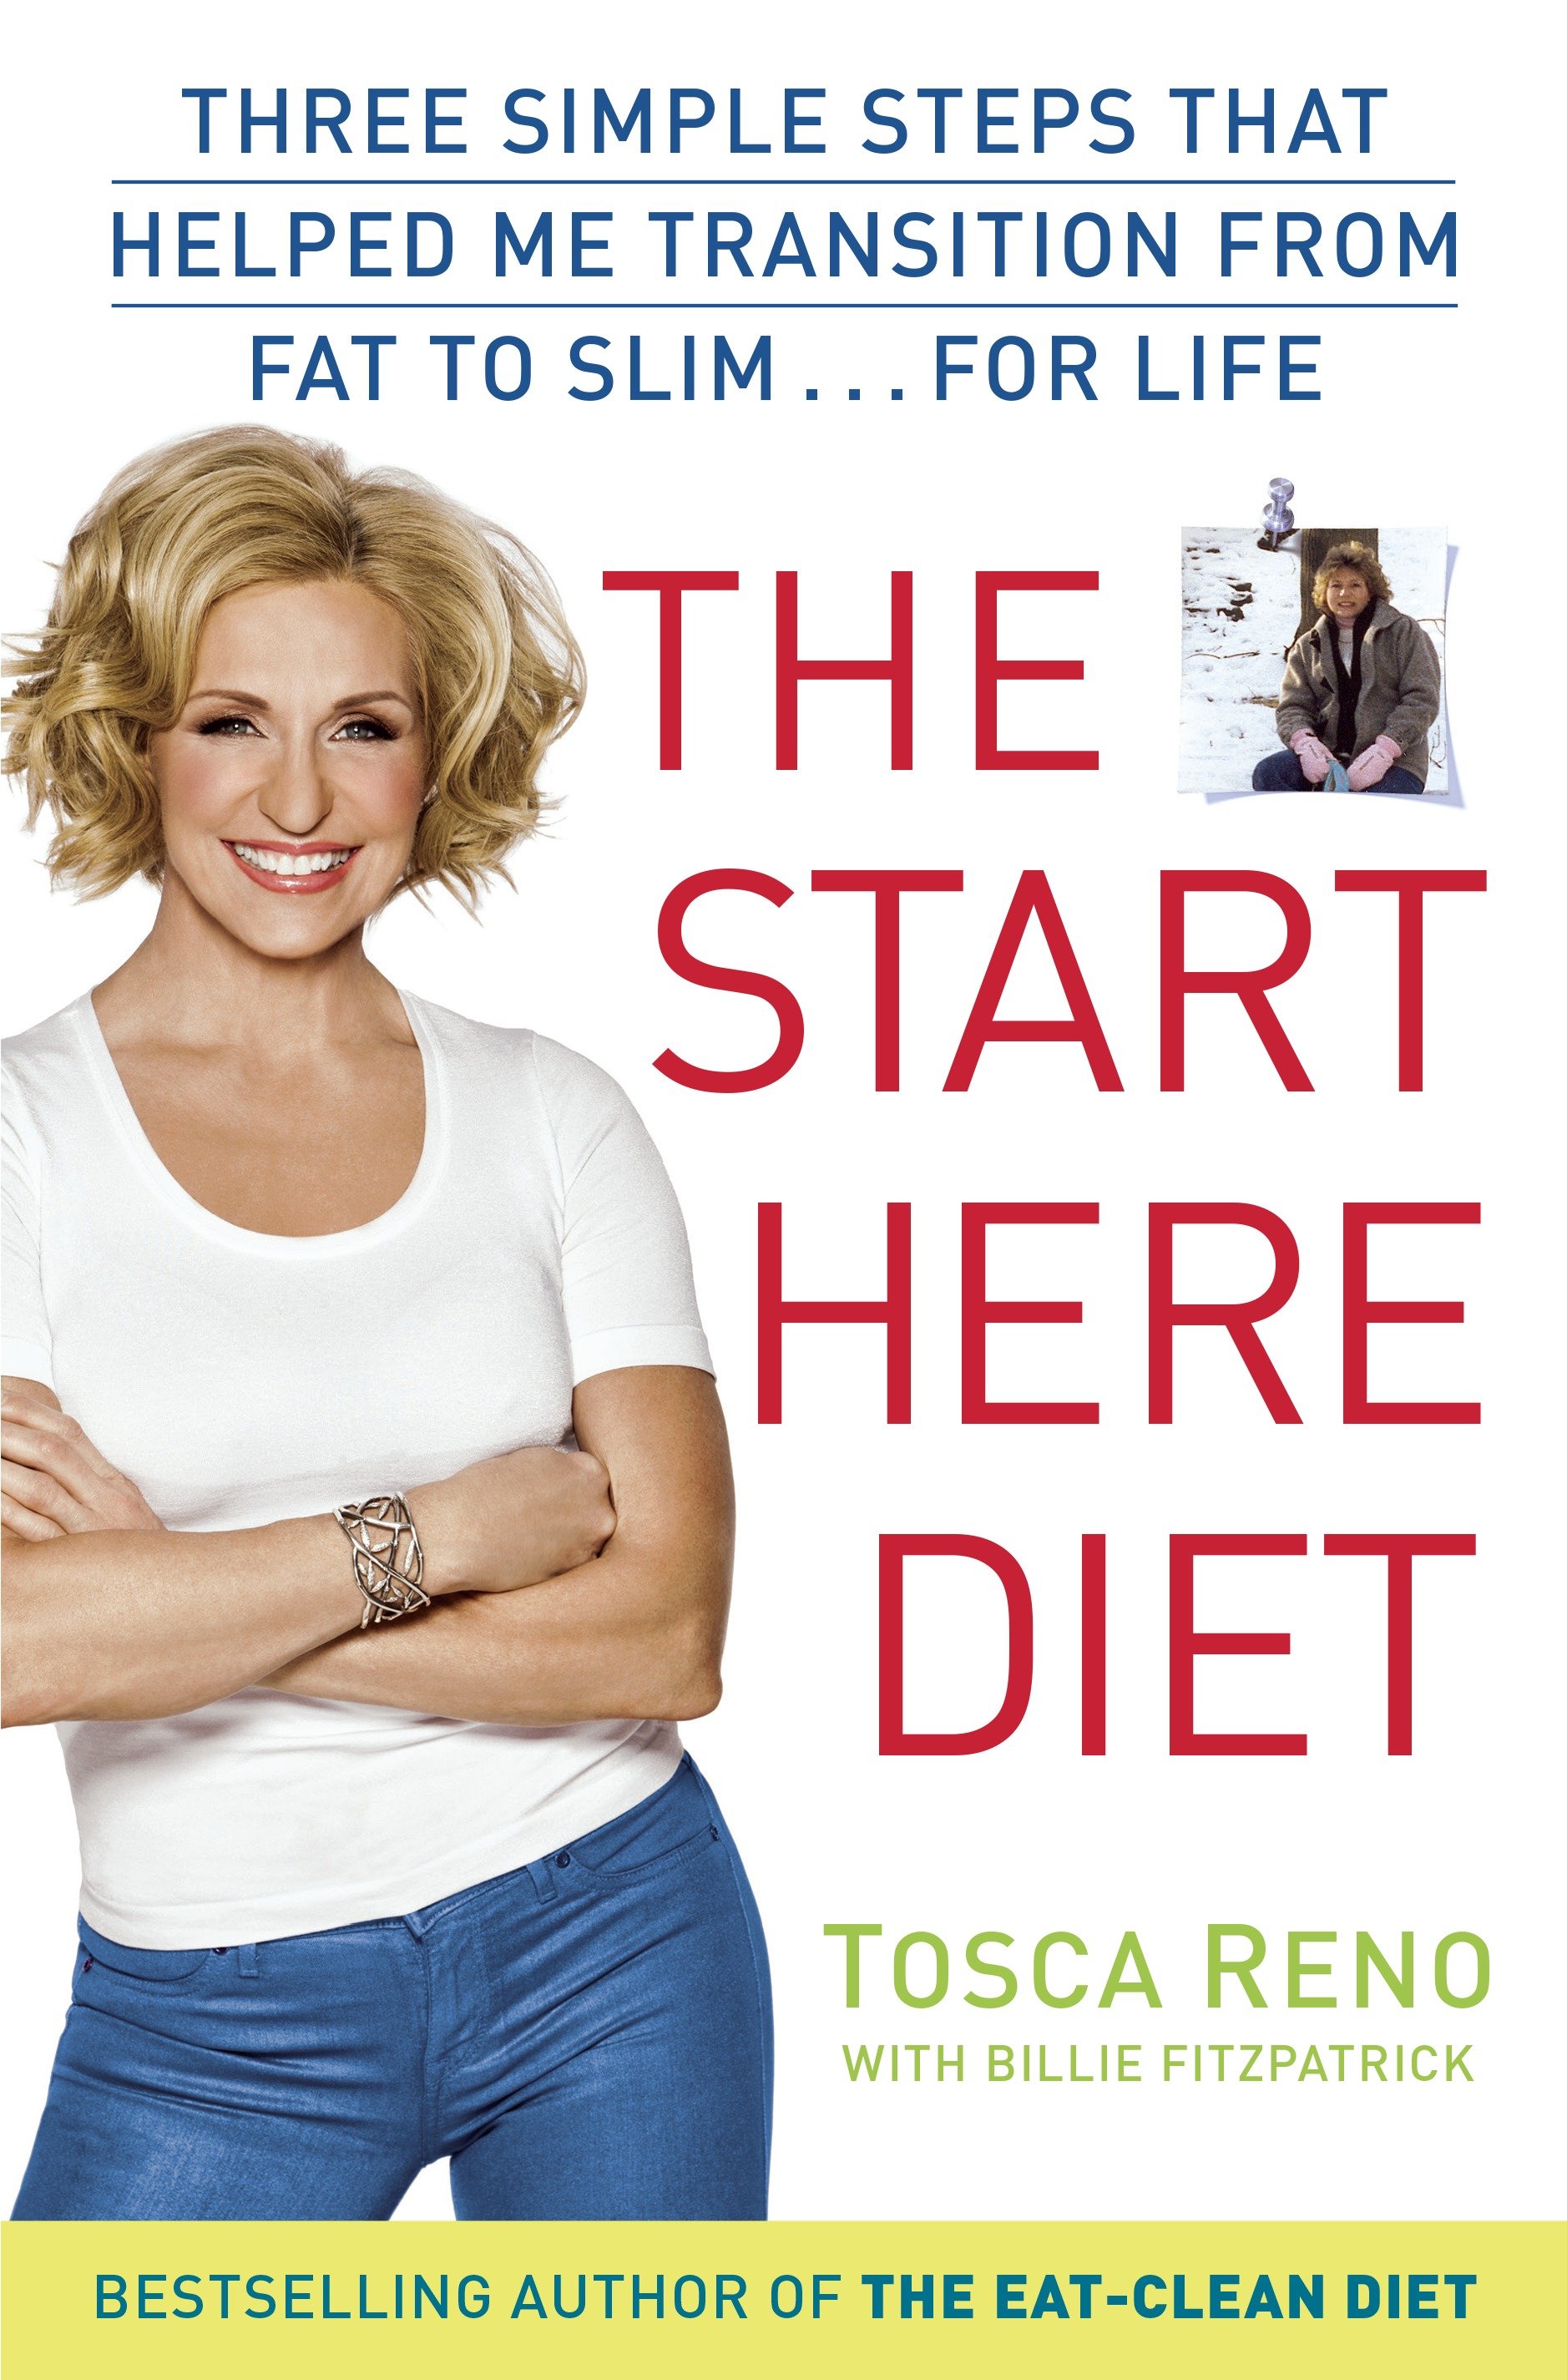 The start here diet three simple steps that helped me transition from Fat to Slim . . . for Life cover image